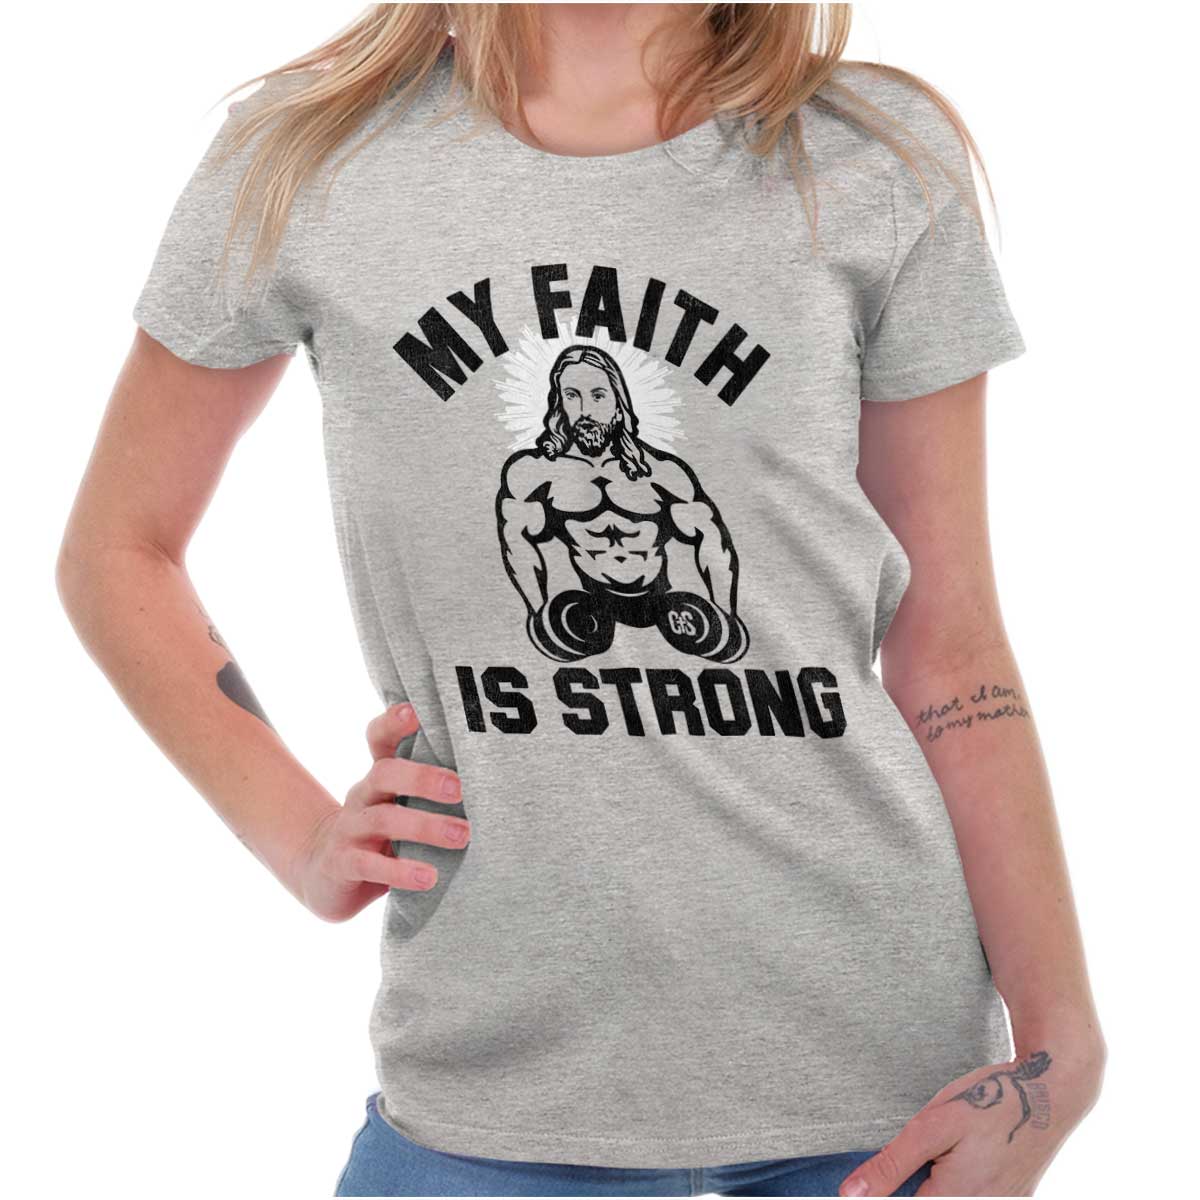 Faith Over Works, Bible Shirt, Weightlifting Gifts, Christian Gifts for Men,  Religious Fitness, Workout Gift for Men, Gym Motivation 